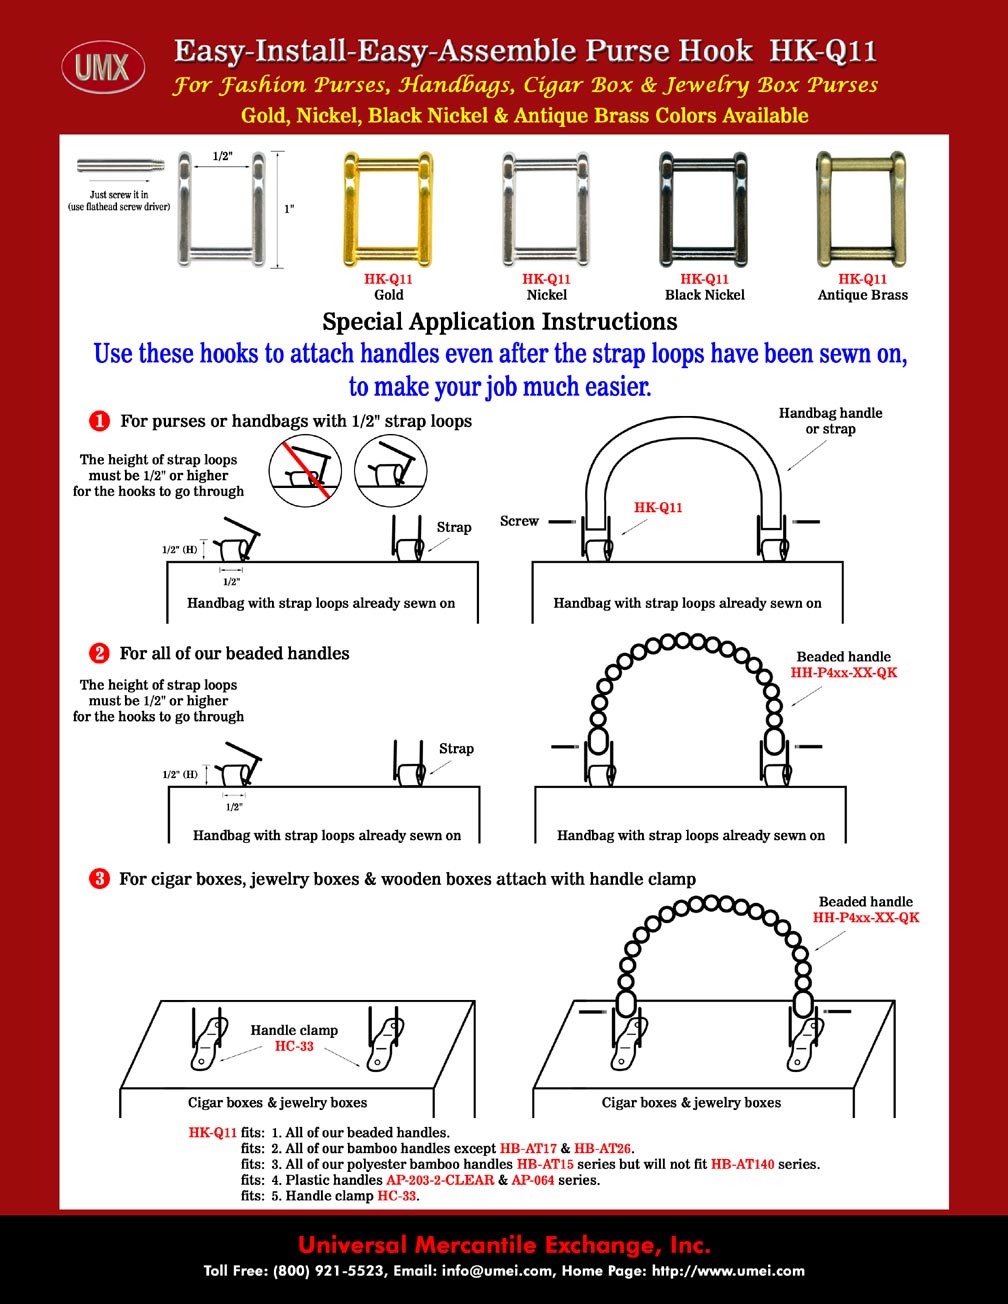 How To Make A Purse Instructions - Straps, Handles and Hooks.